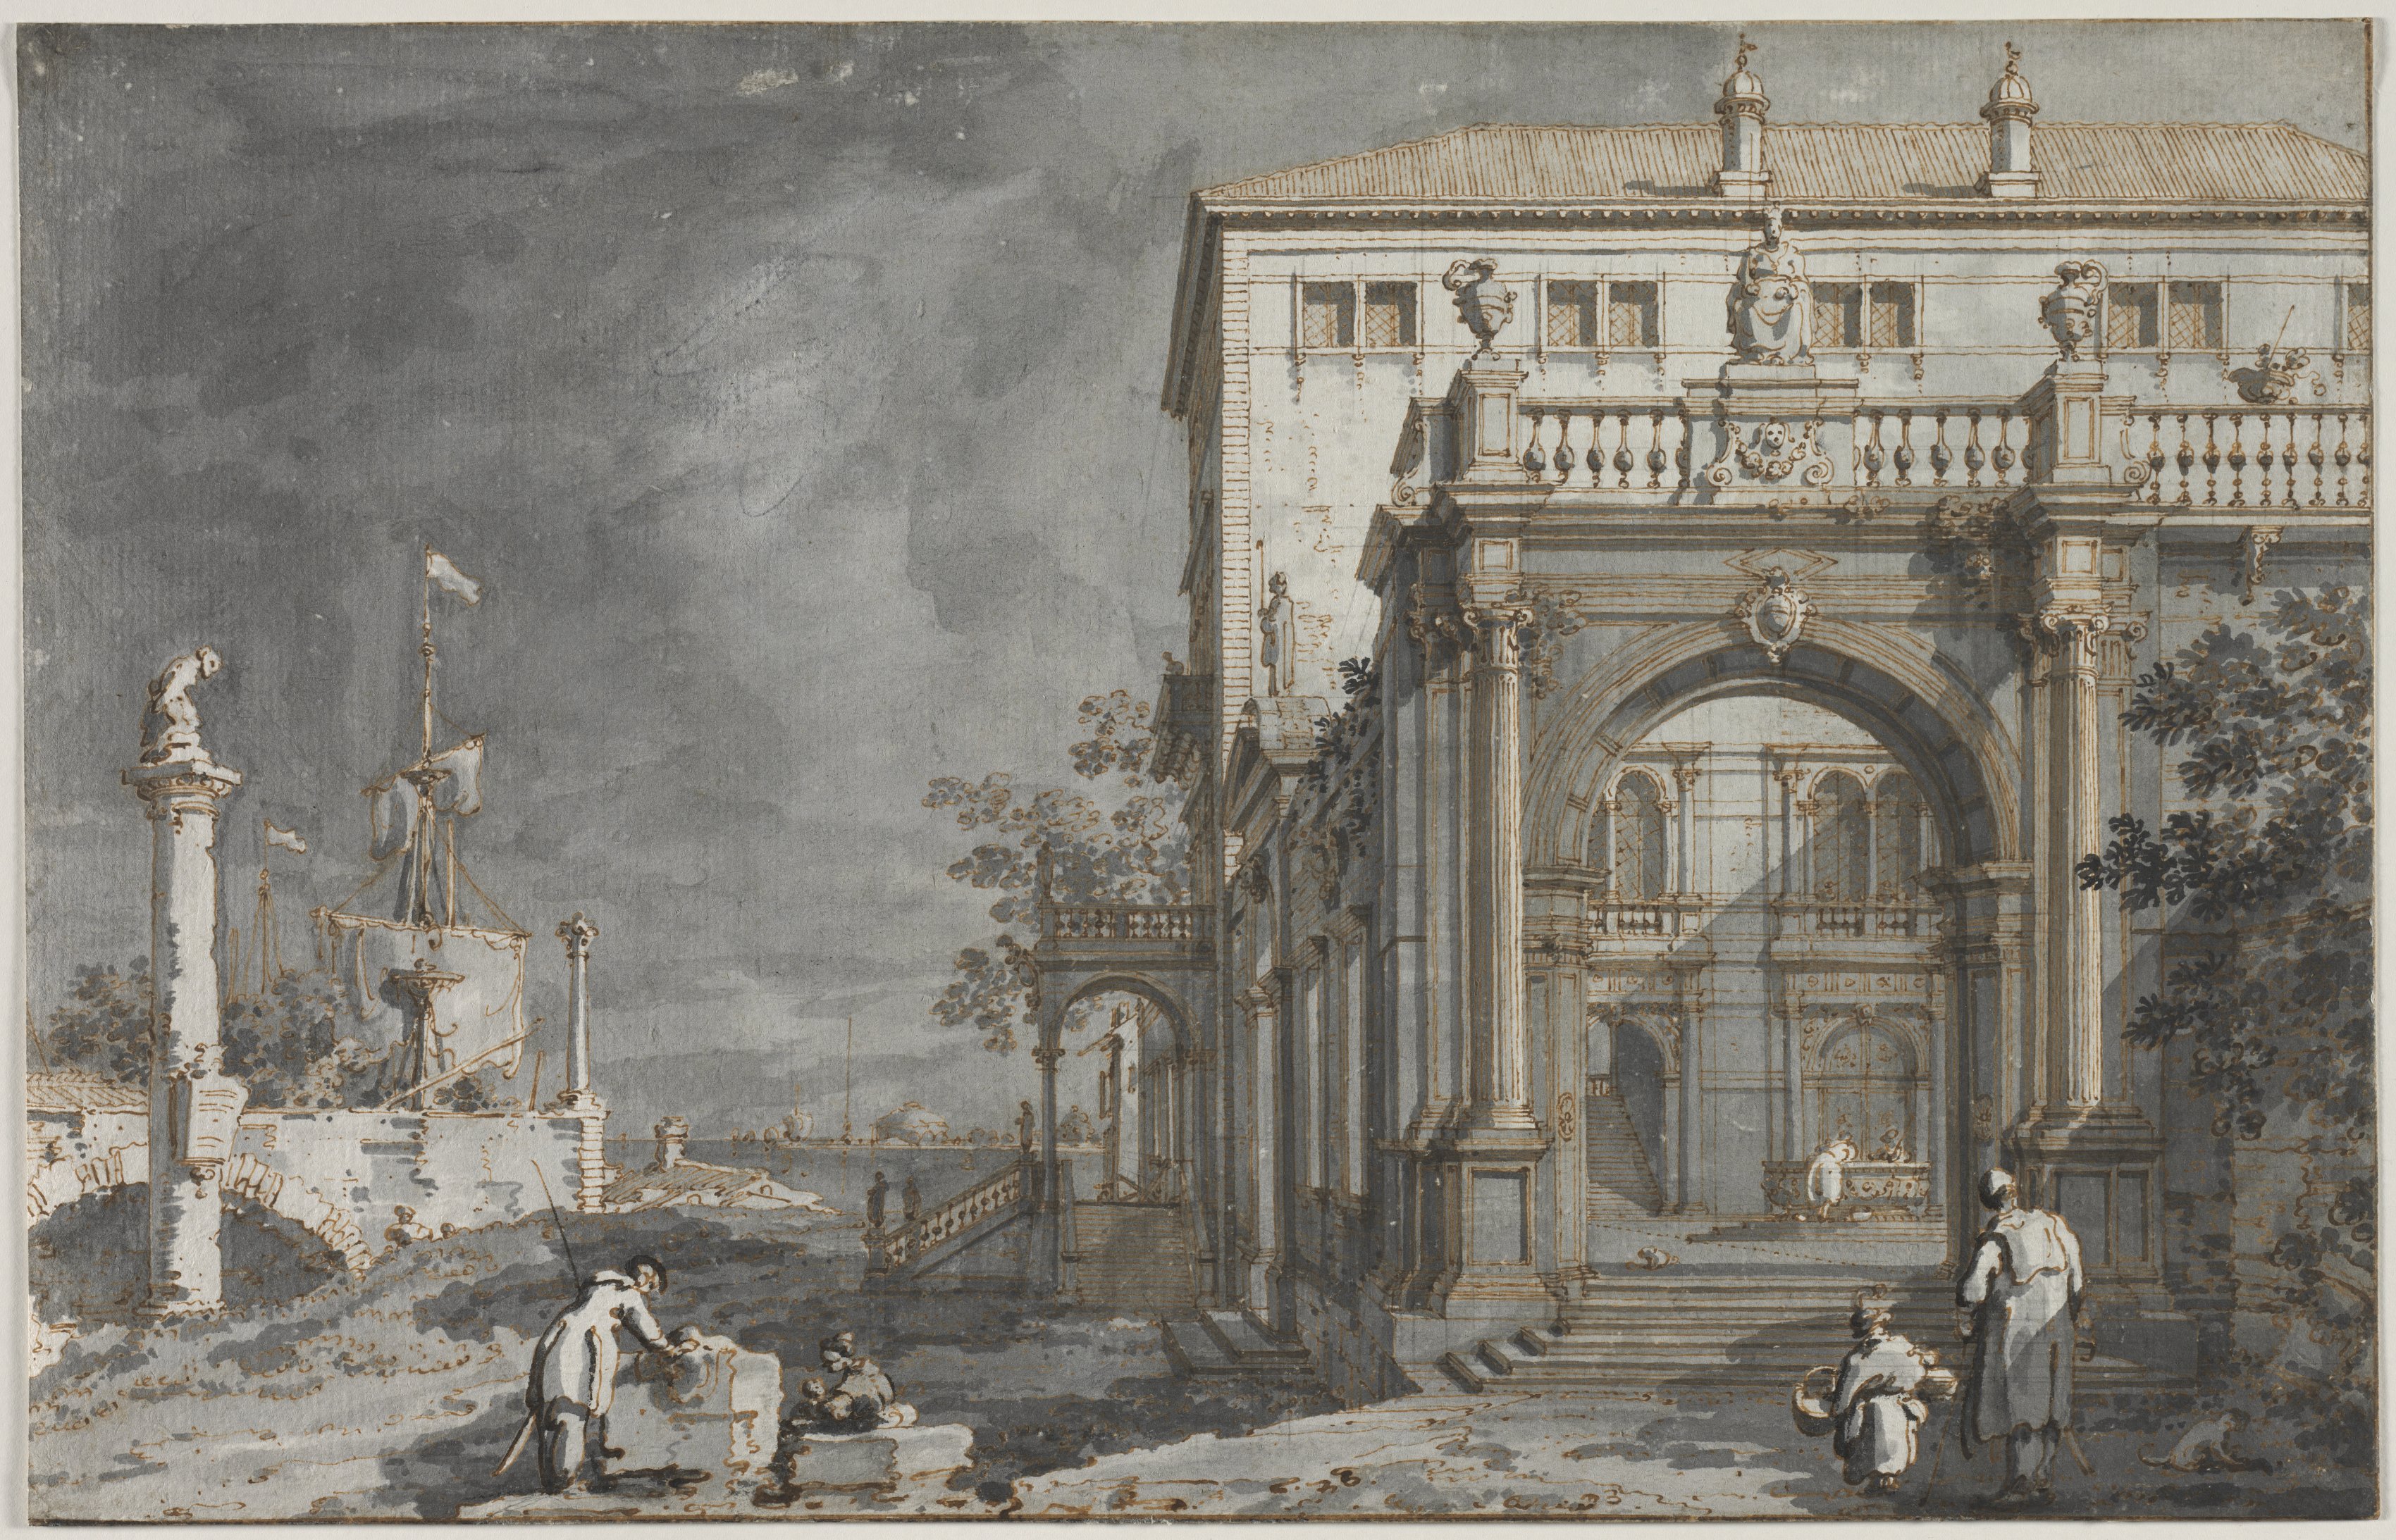 Capriccio: A Palace with a Courtyard by the Lagoon